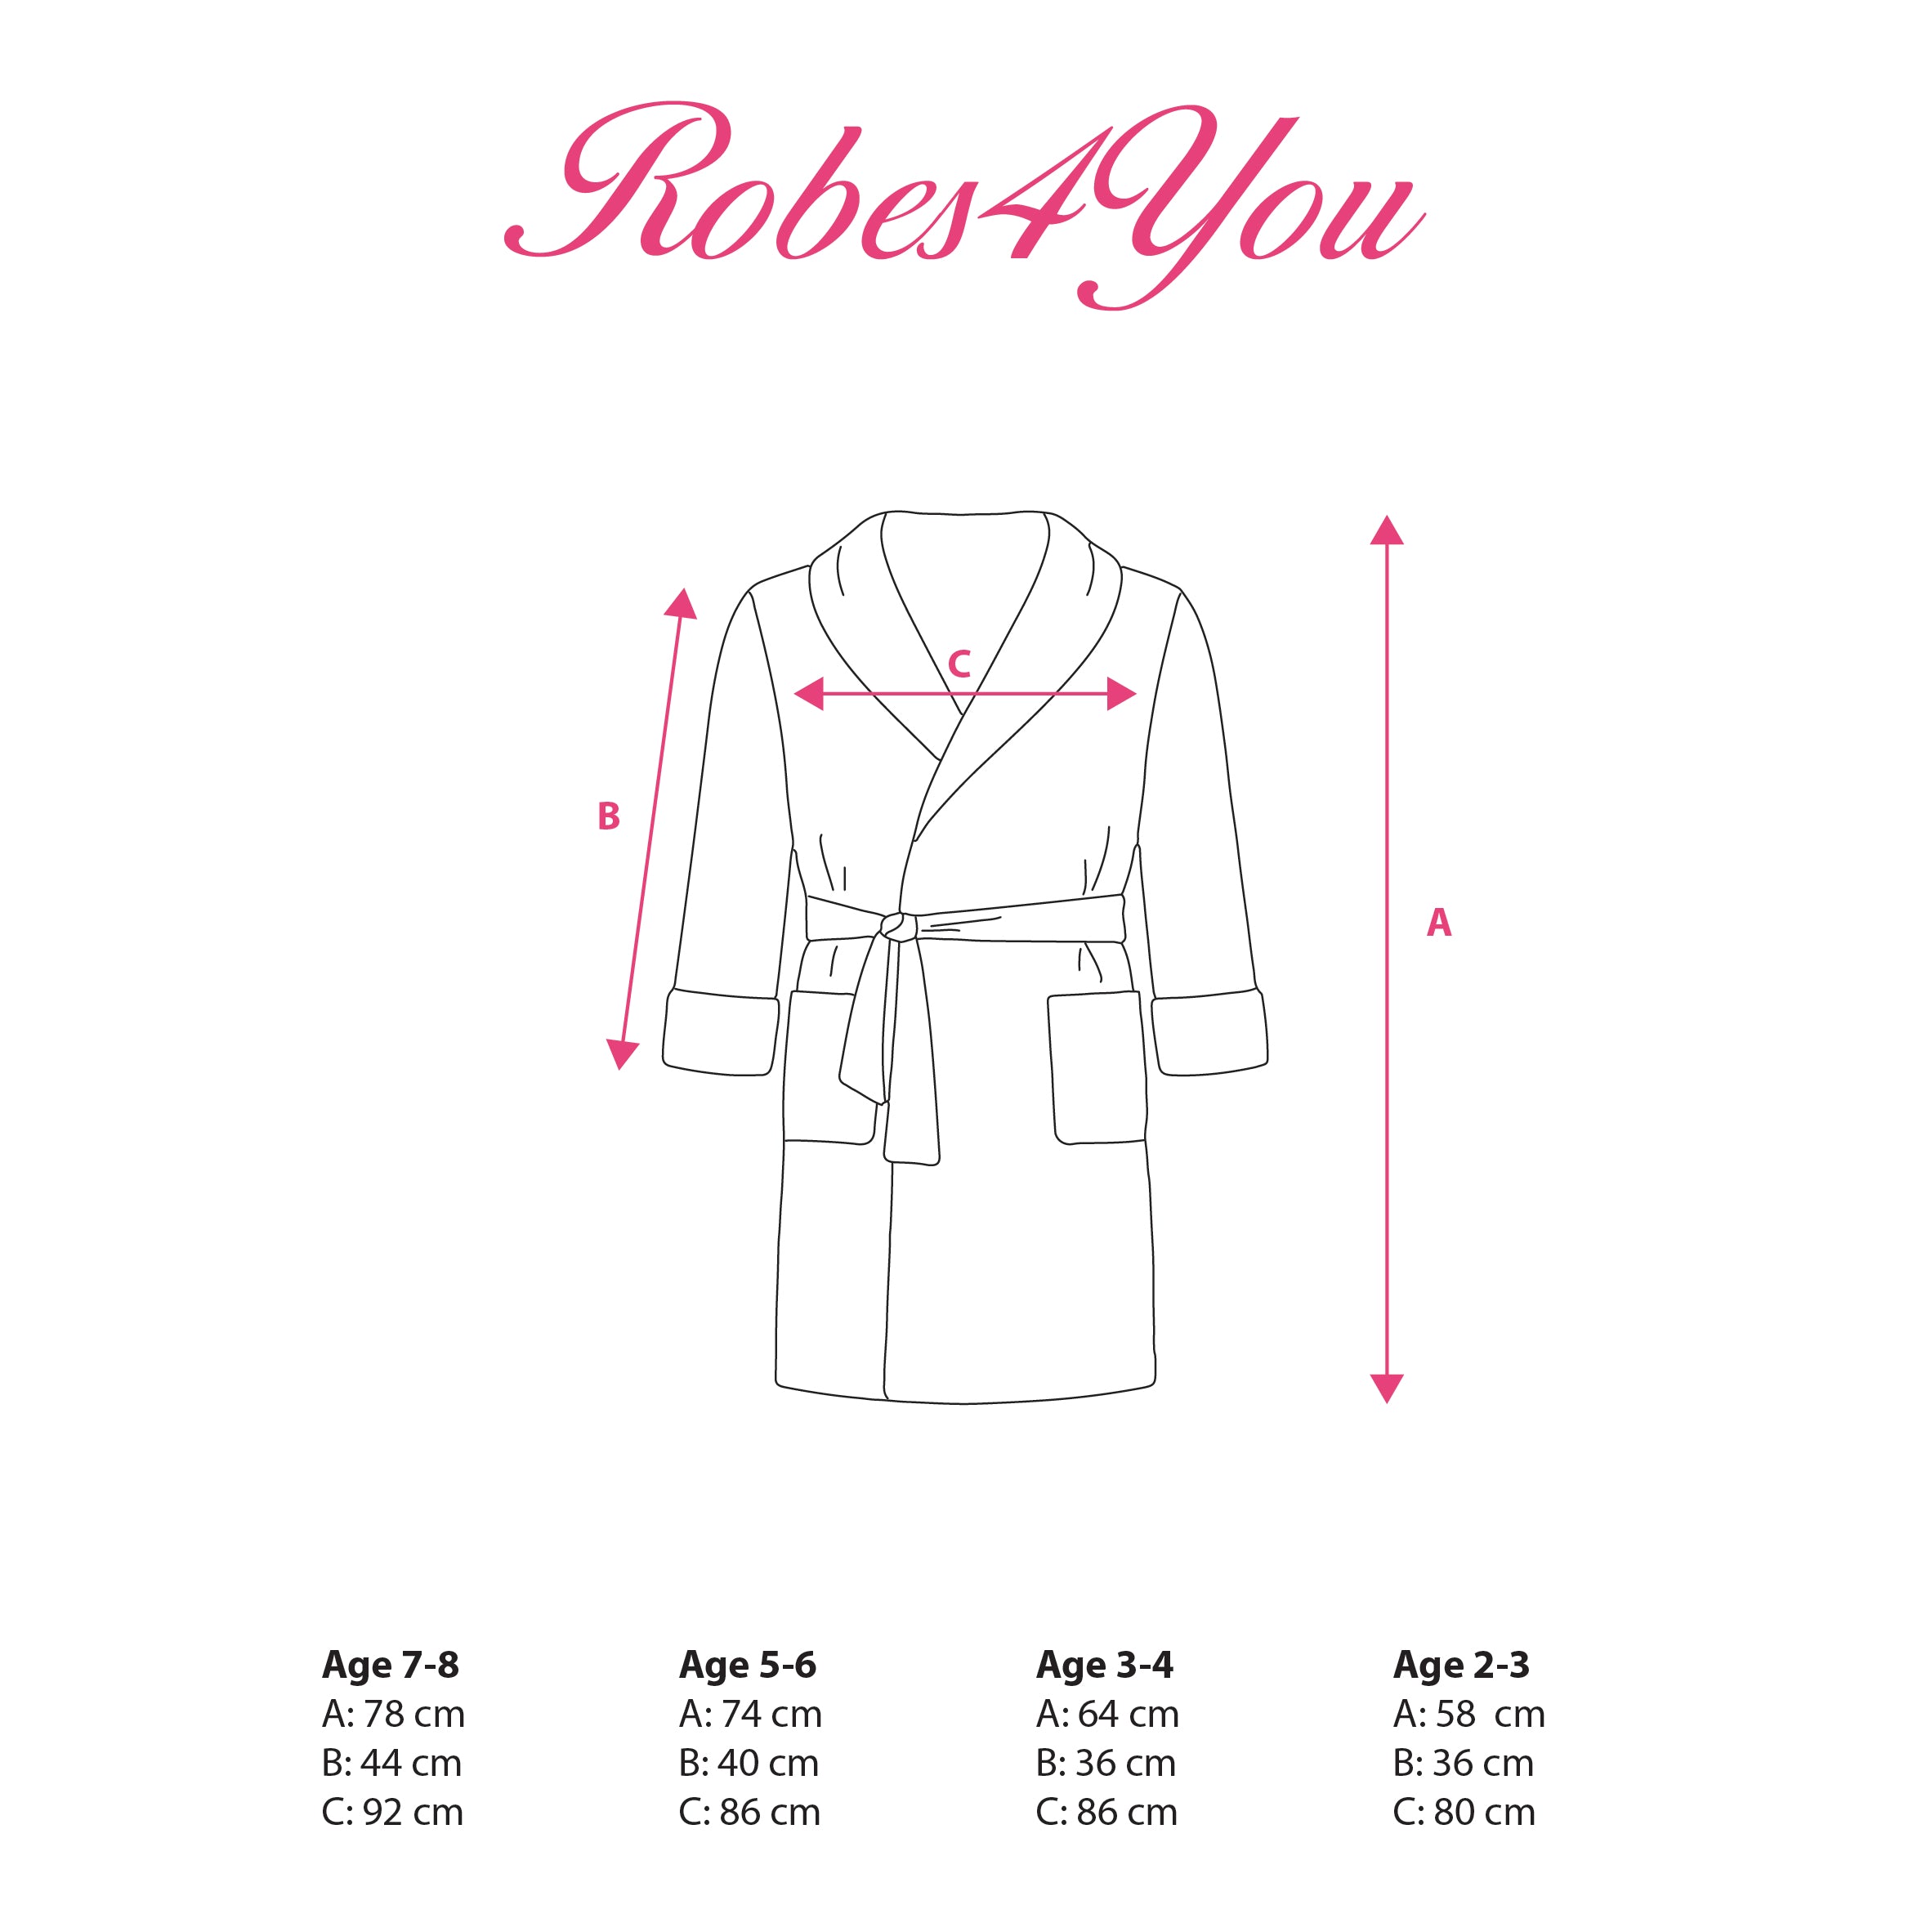 Children's robe sizing- robes4you